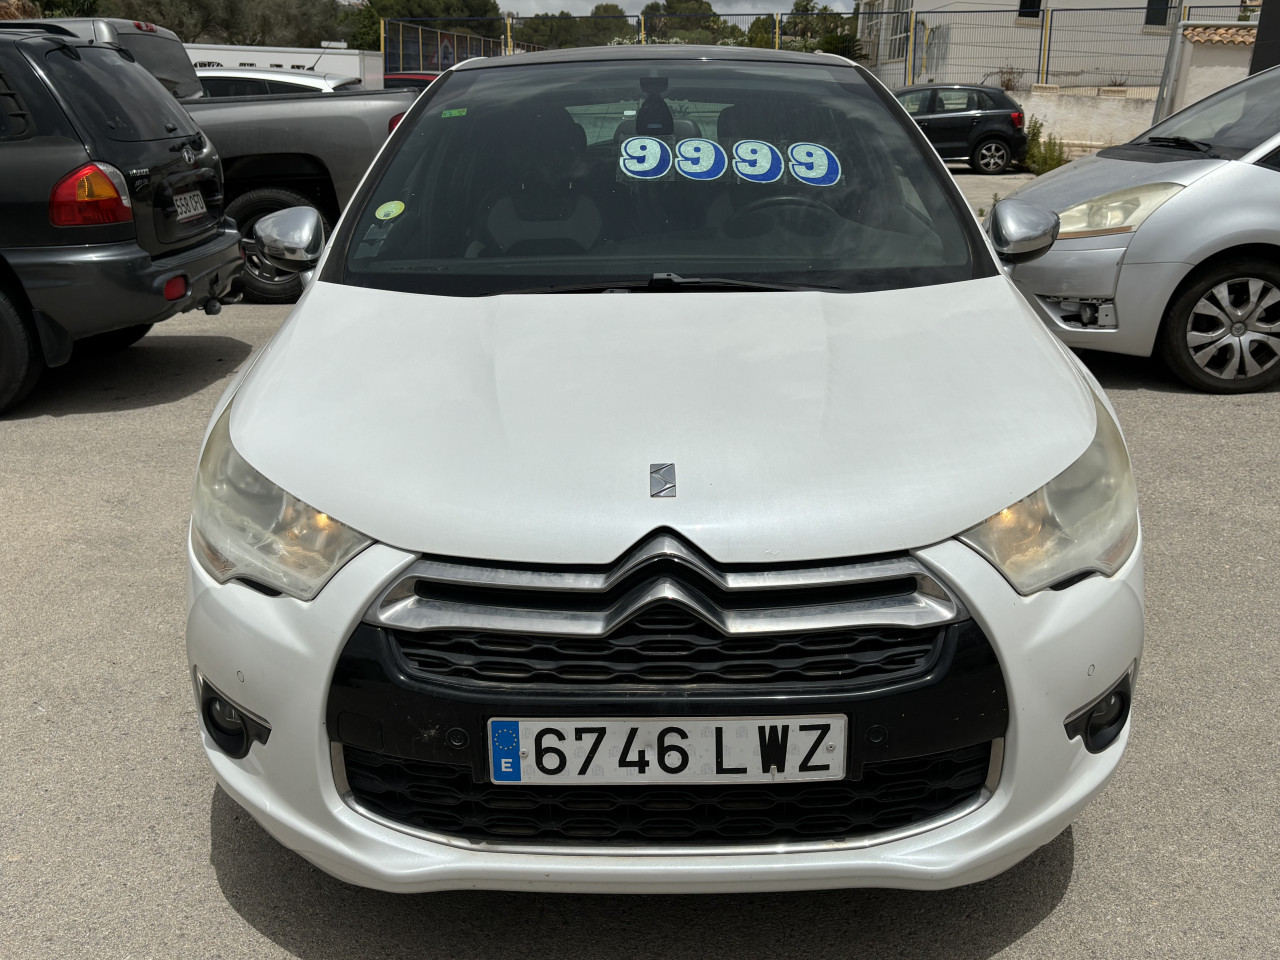 DS Automobiles C4 1.6 Hdi Hatchback 2013 